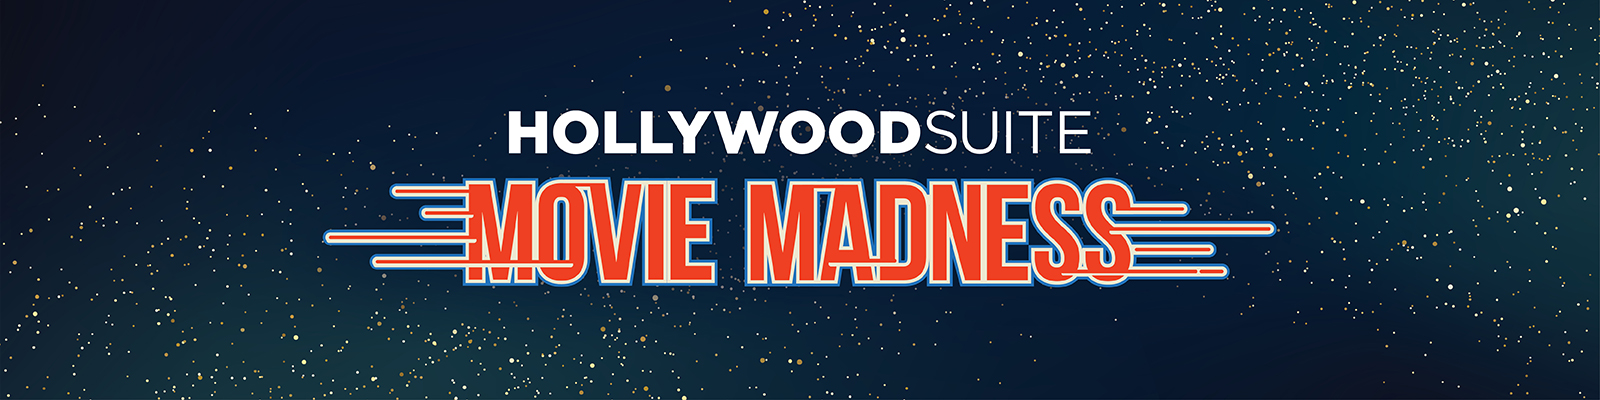 Hollywood Suite Movie Madness